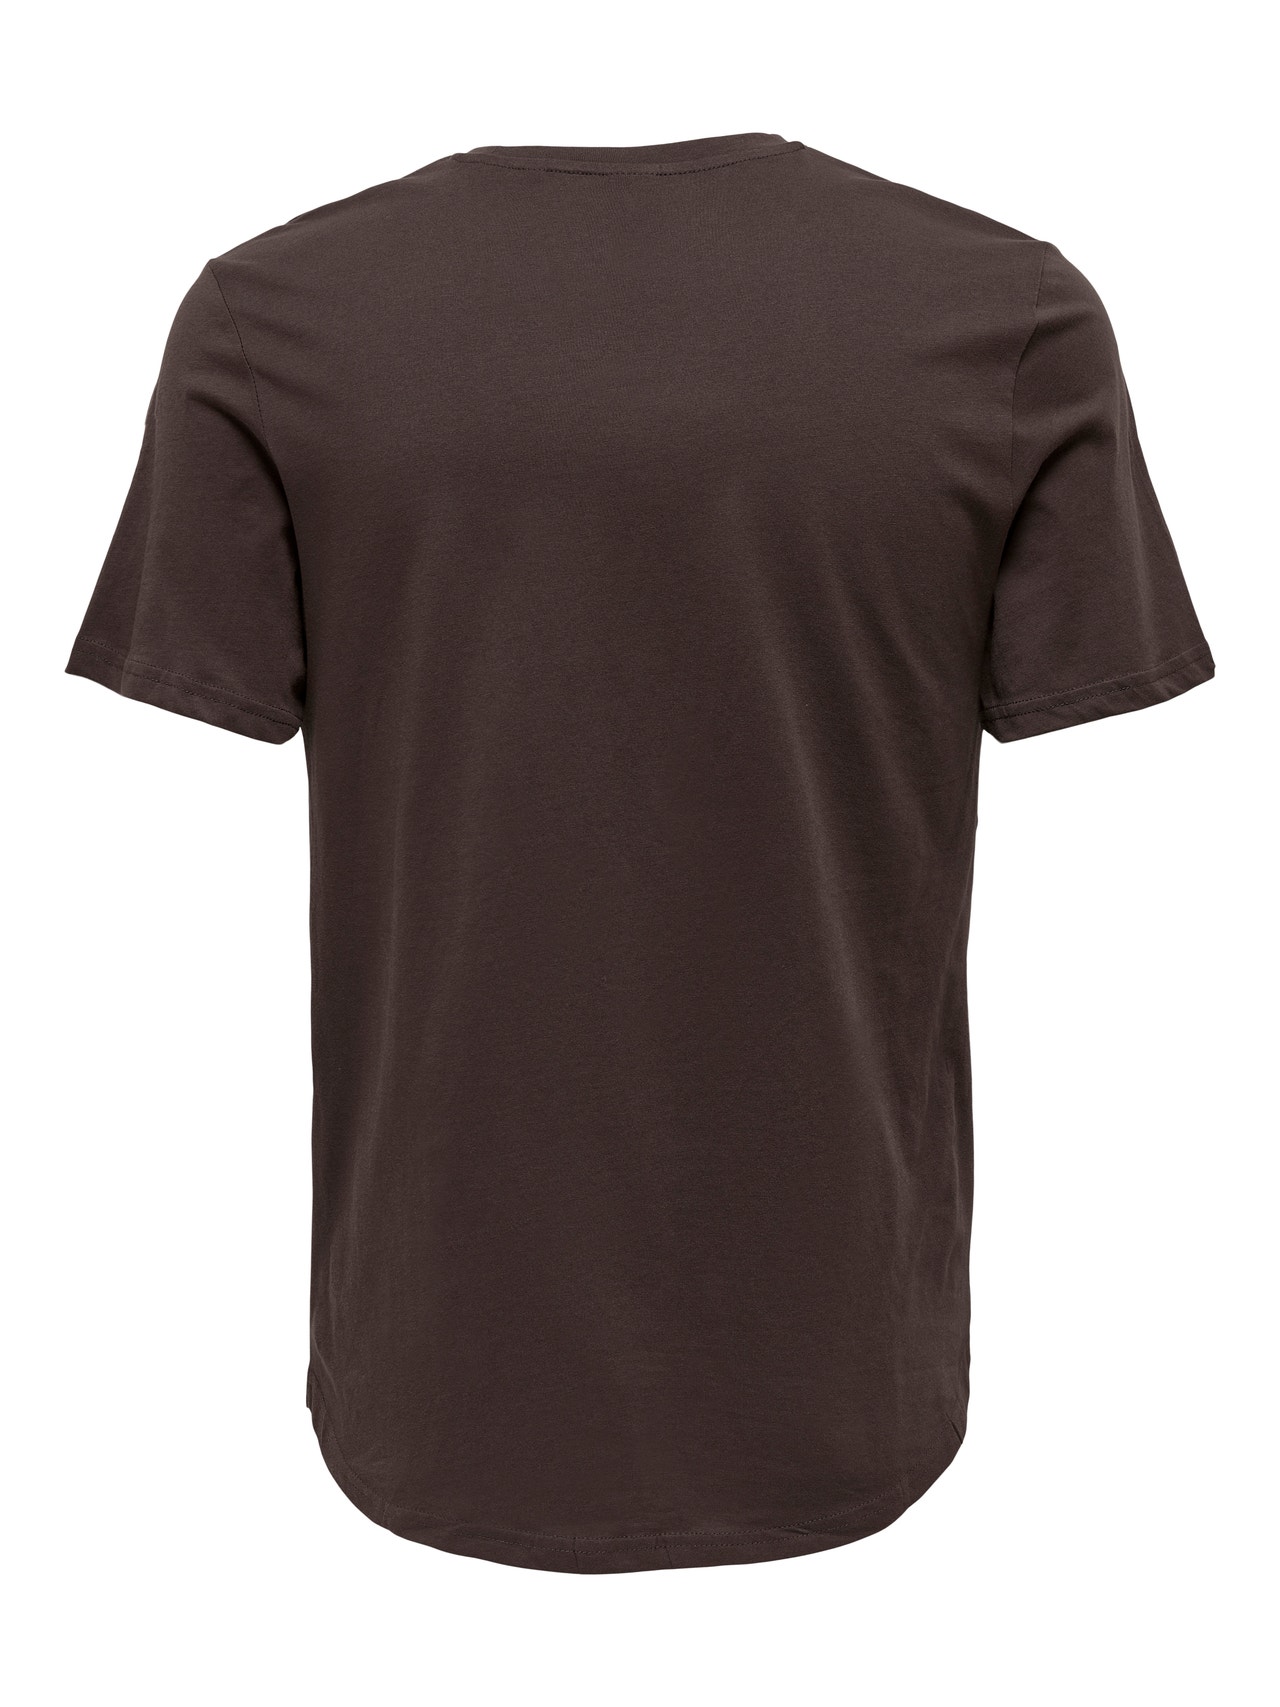 ONLY & SONS Long Line Fit Round Neck T-Shirt -Seal Brown - 22002973